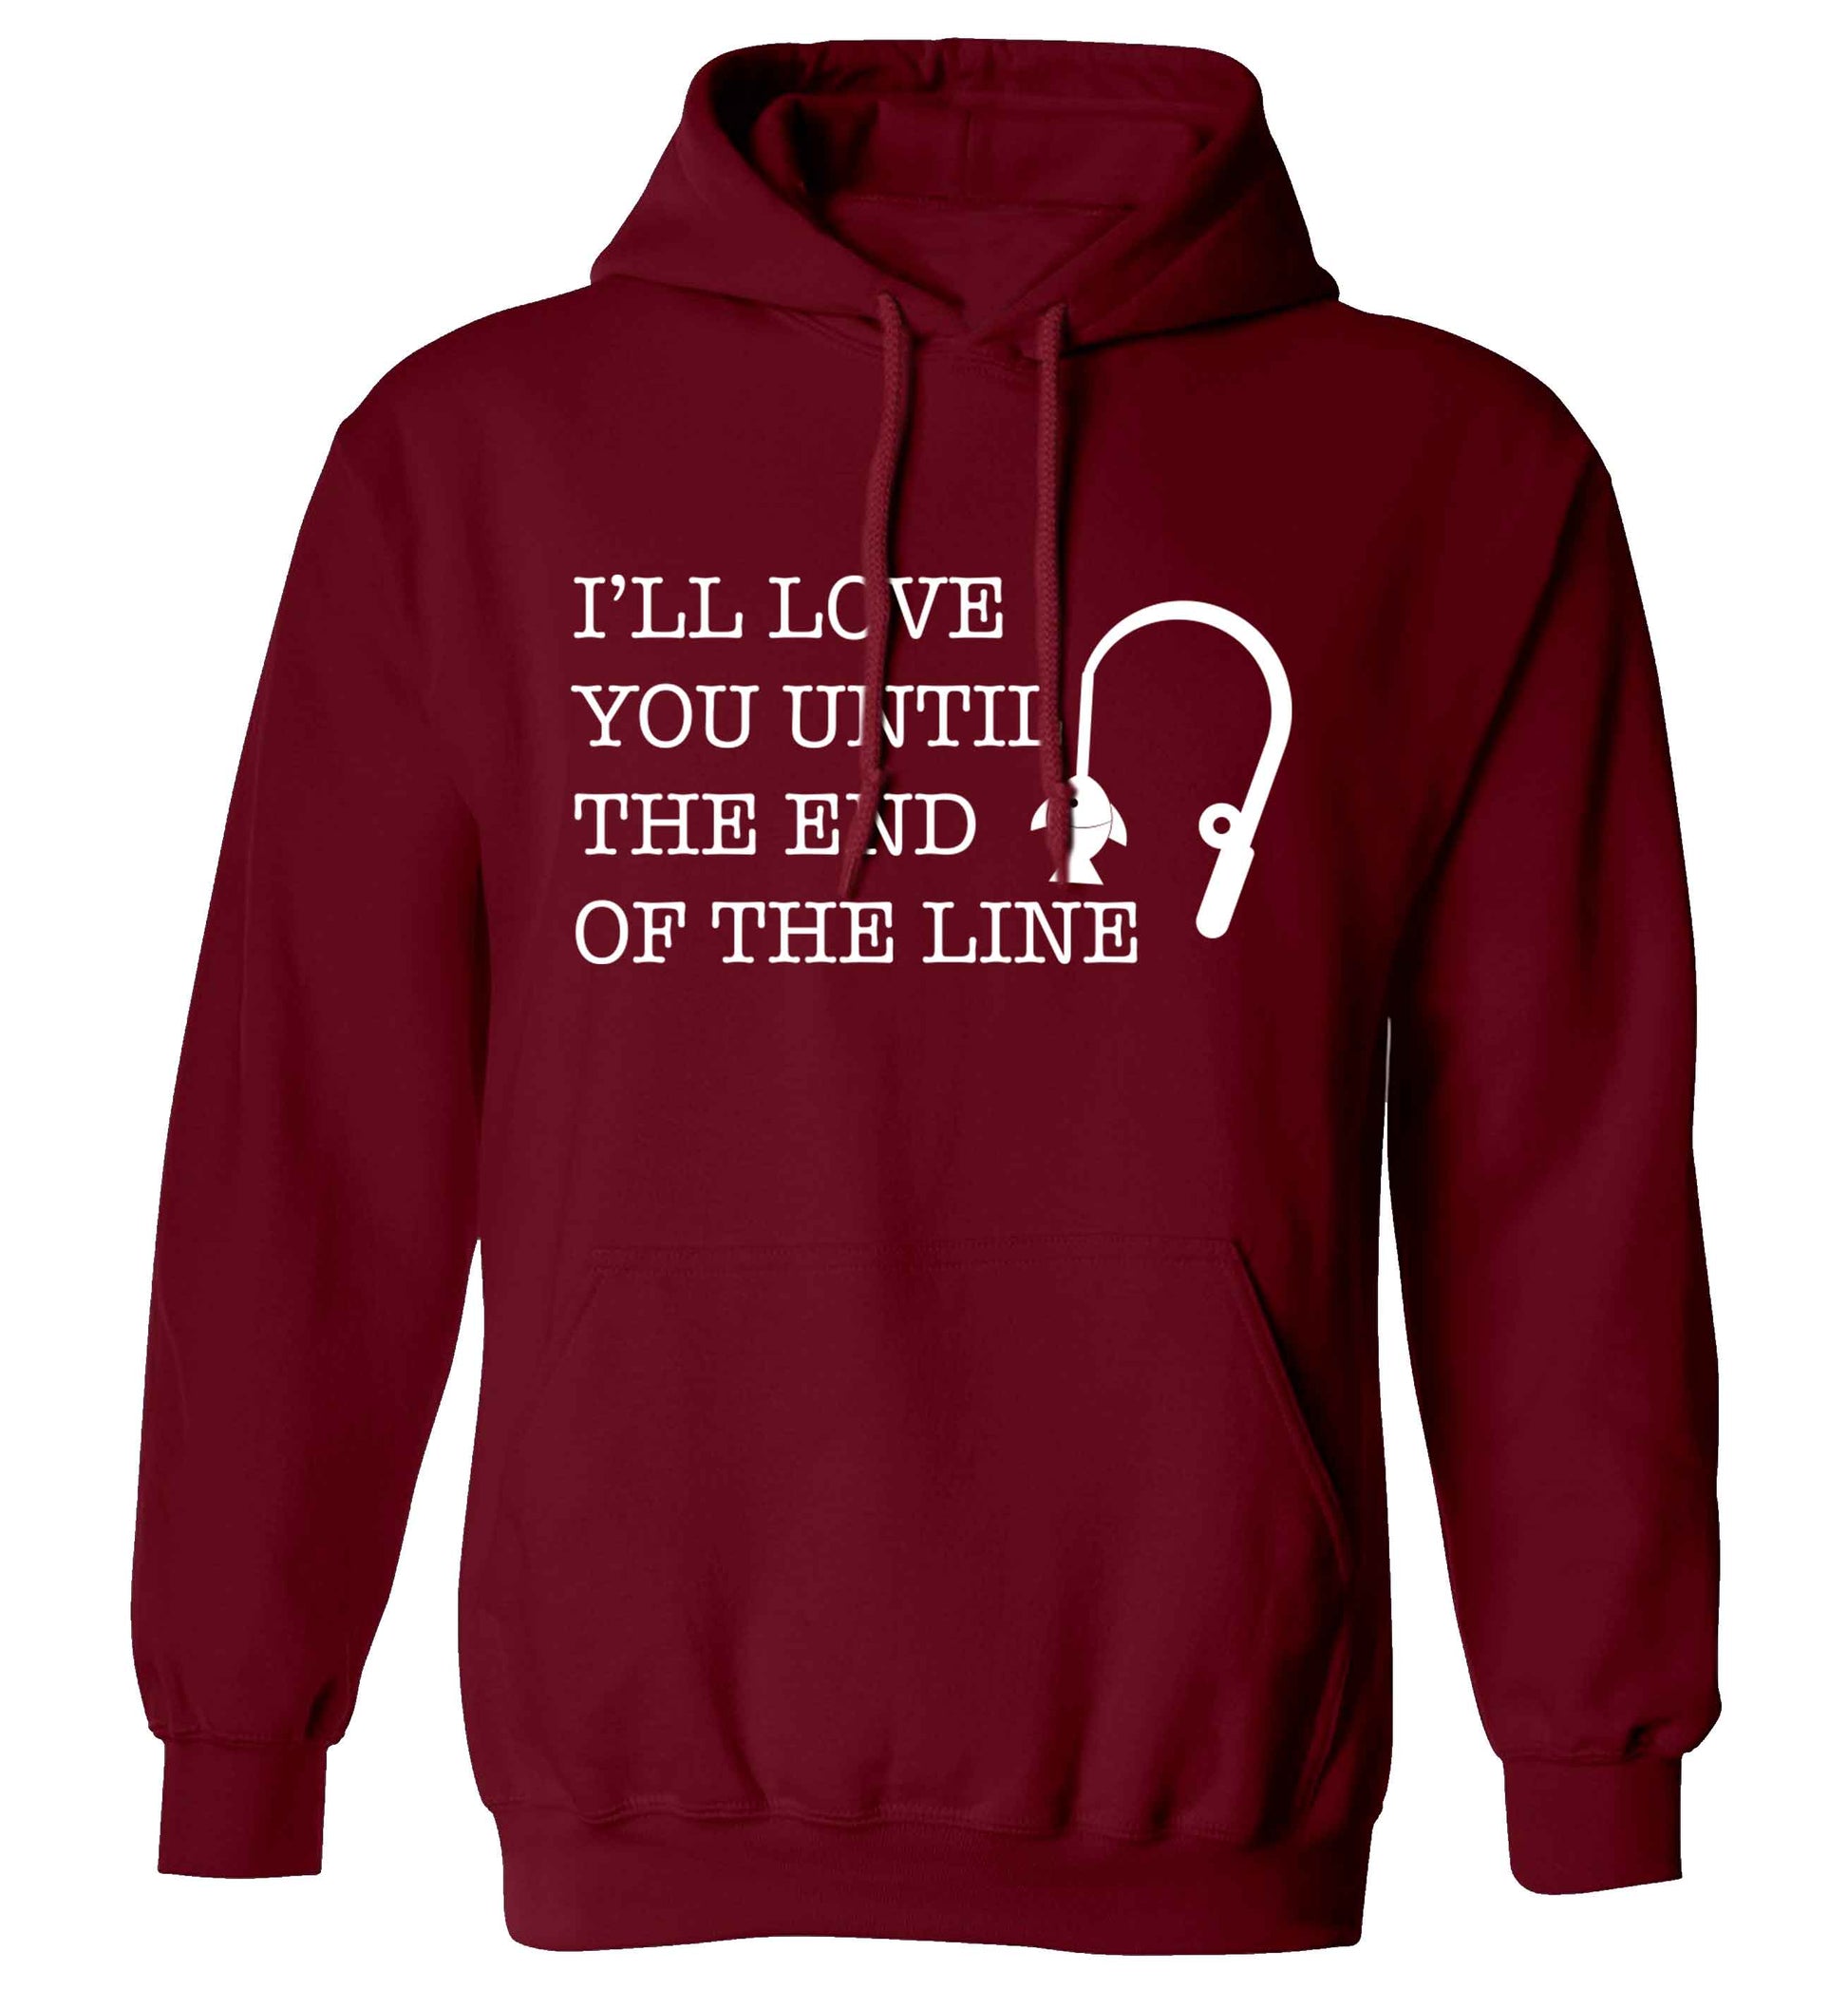 I'll love you until the end of the line adults unisex maroon hoodie 2XL